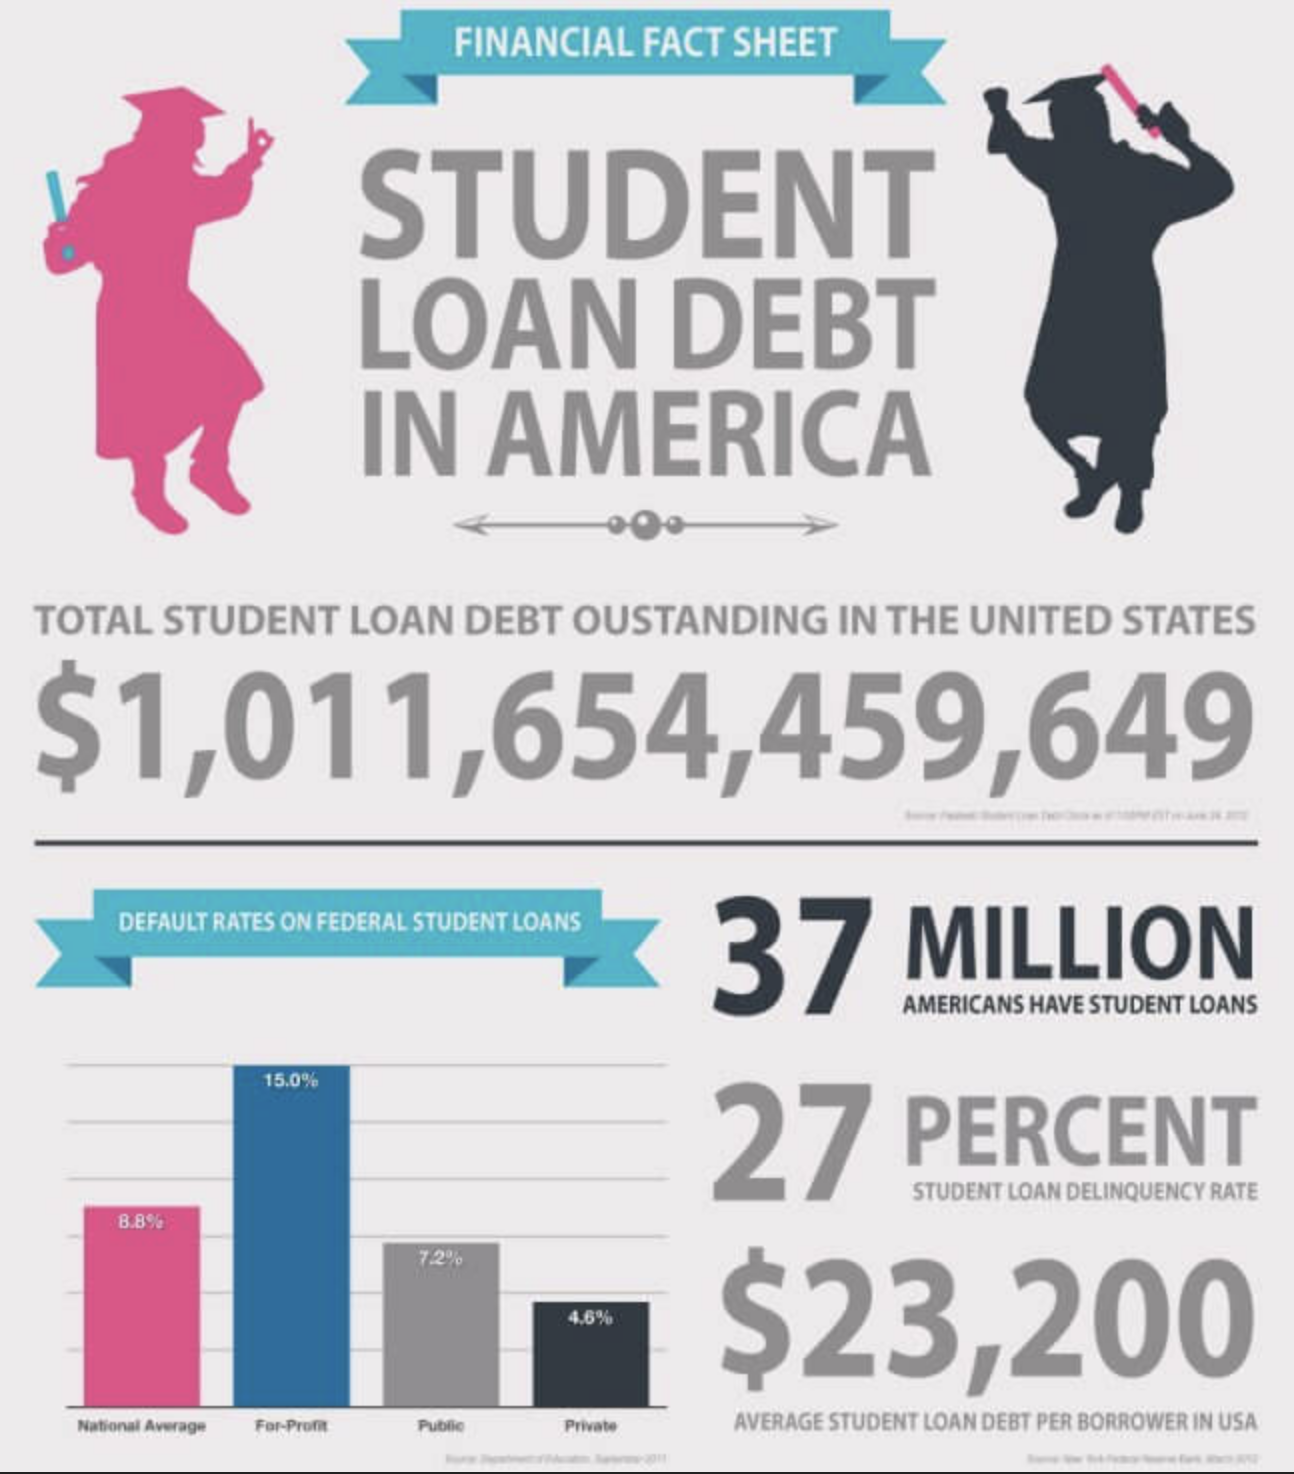 Student Loan Providers Foundation for Ensuring Access and Equity